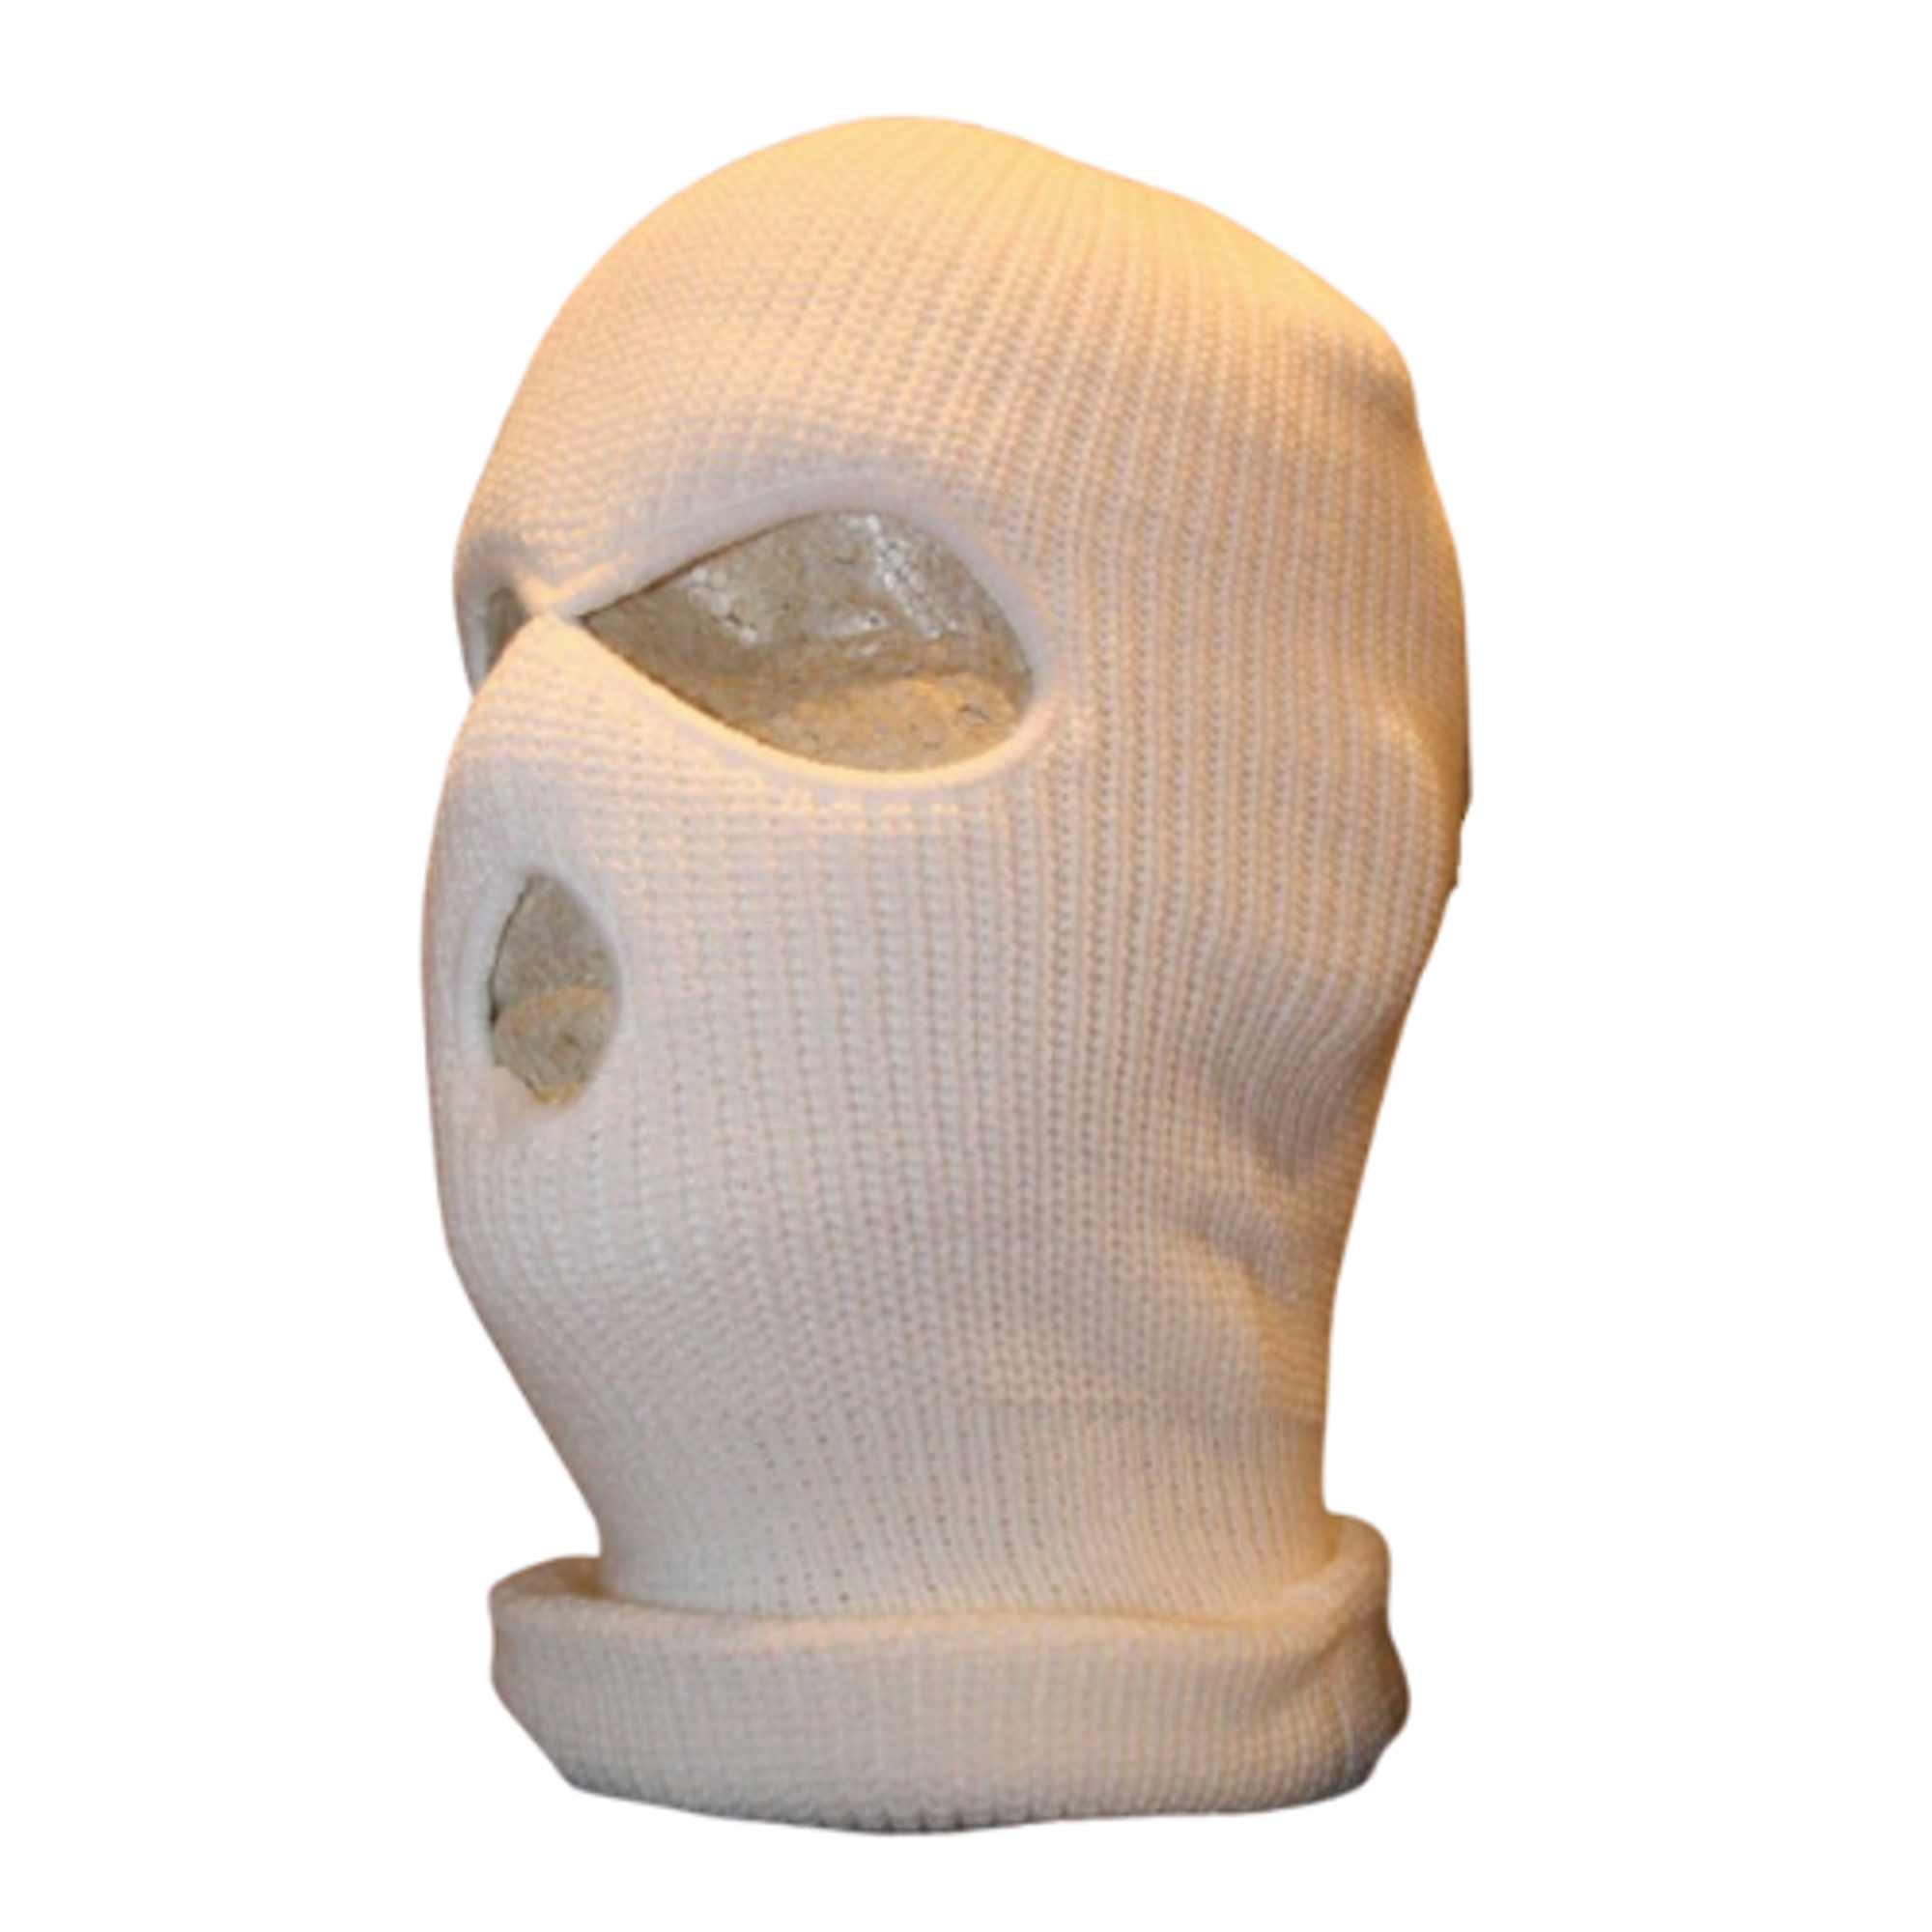 ARMORAY Ski Mask for Women - Thermal Winter Face Mask Cold Weather